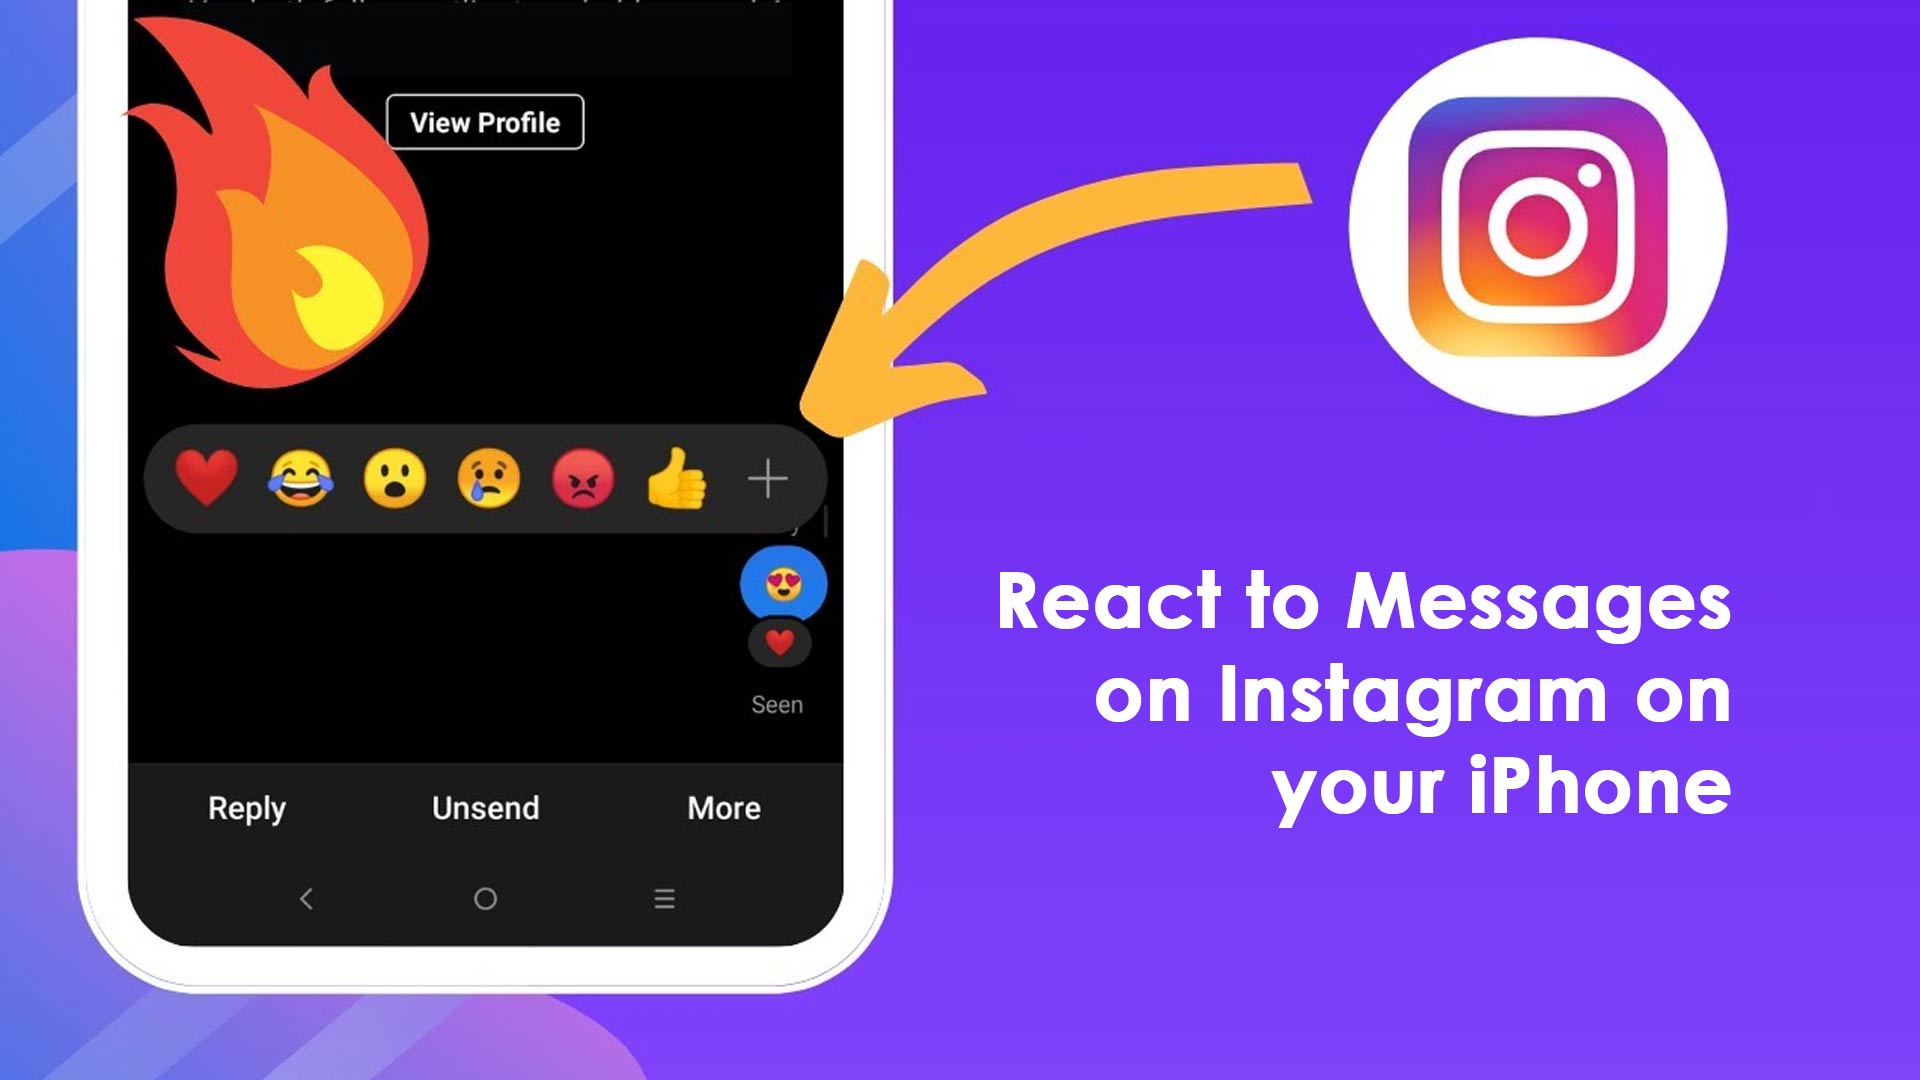 How to React to Messages on Instagram on your iPhone